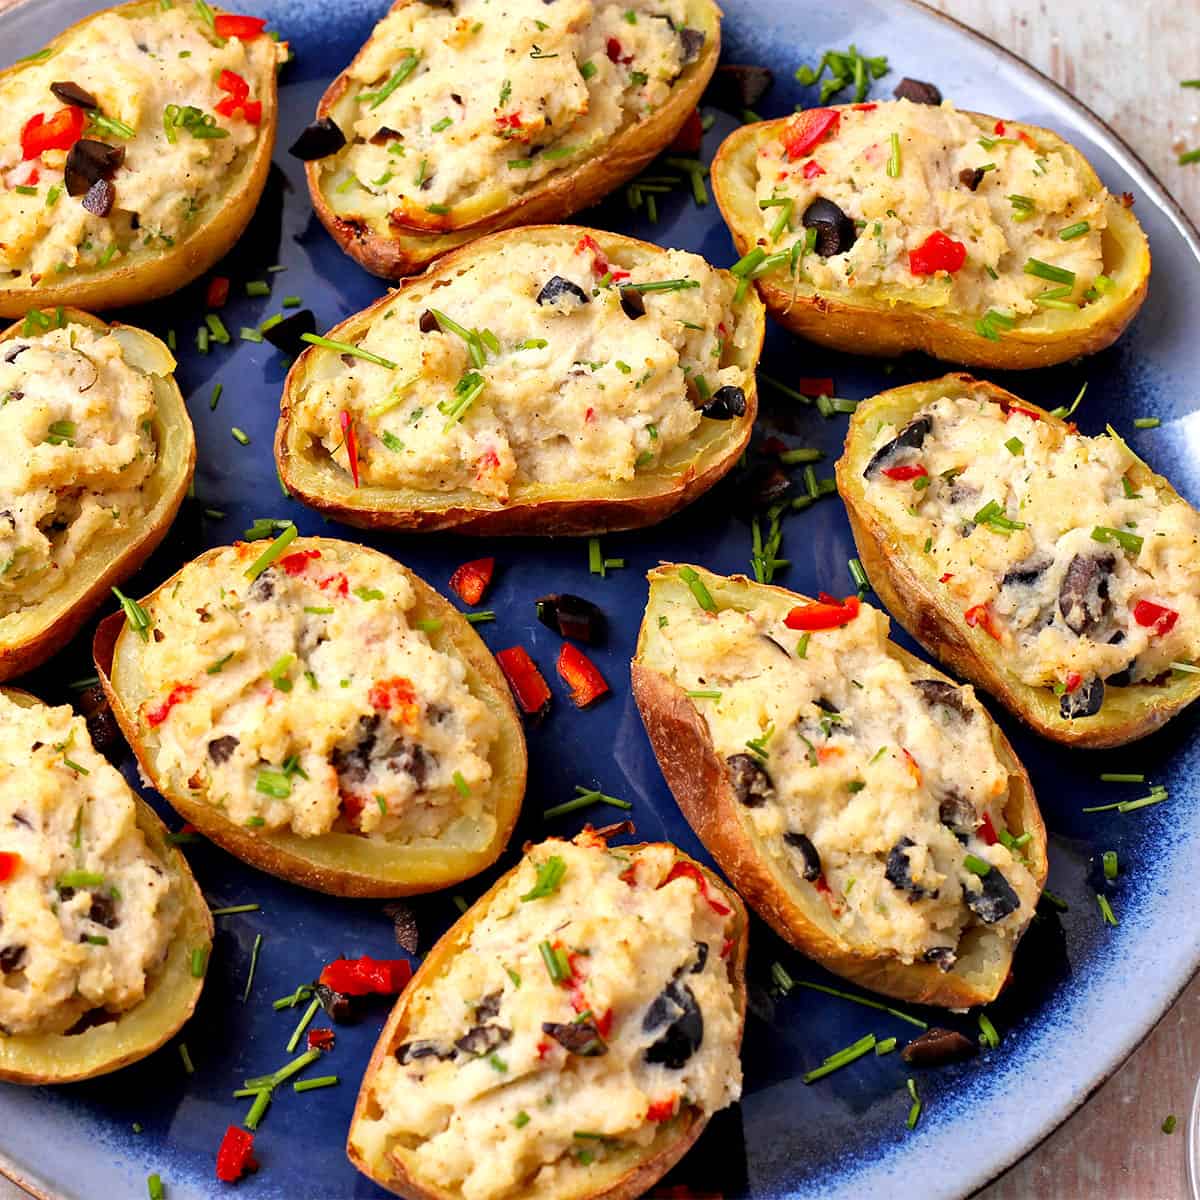 Twice-baked potatoes halves with black olives, chives, and red chili on a blue plate.